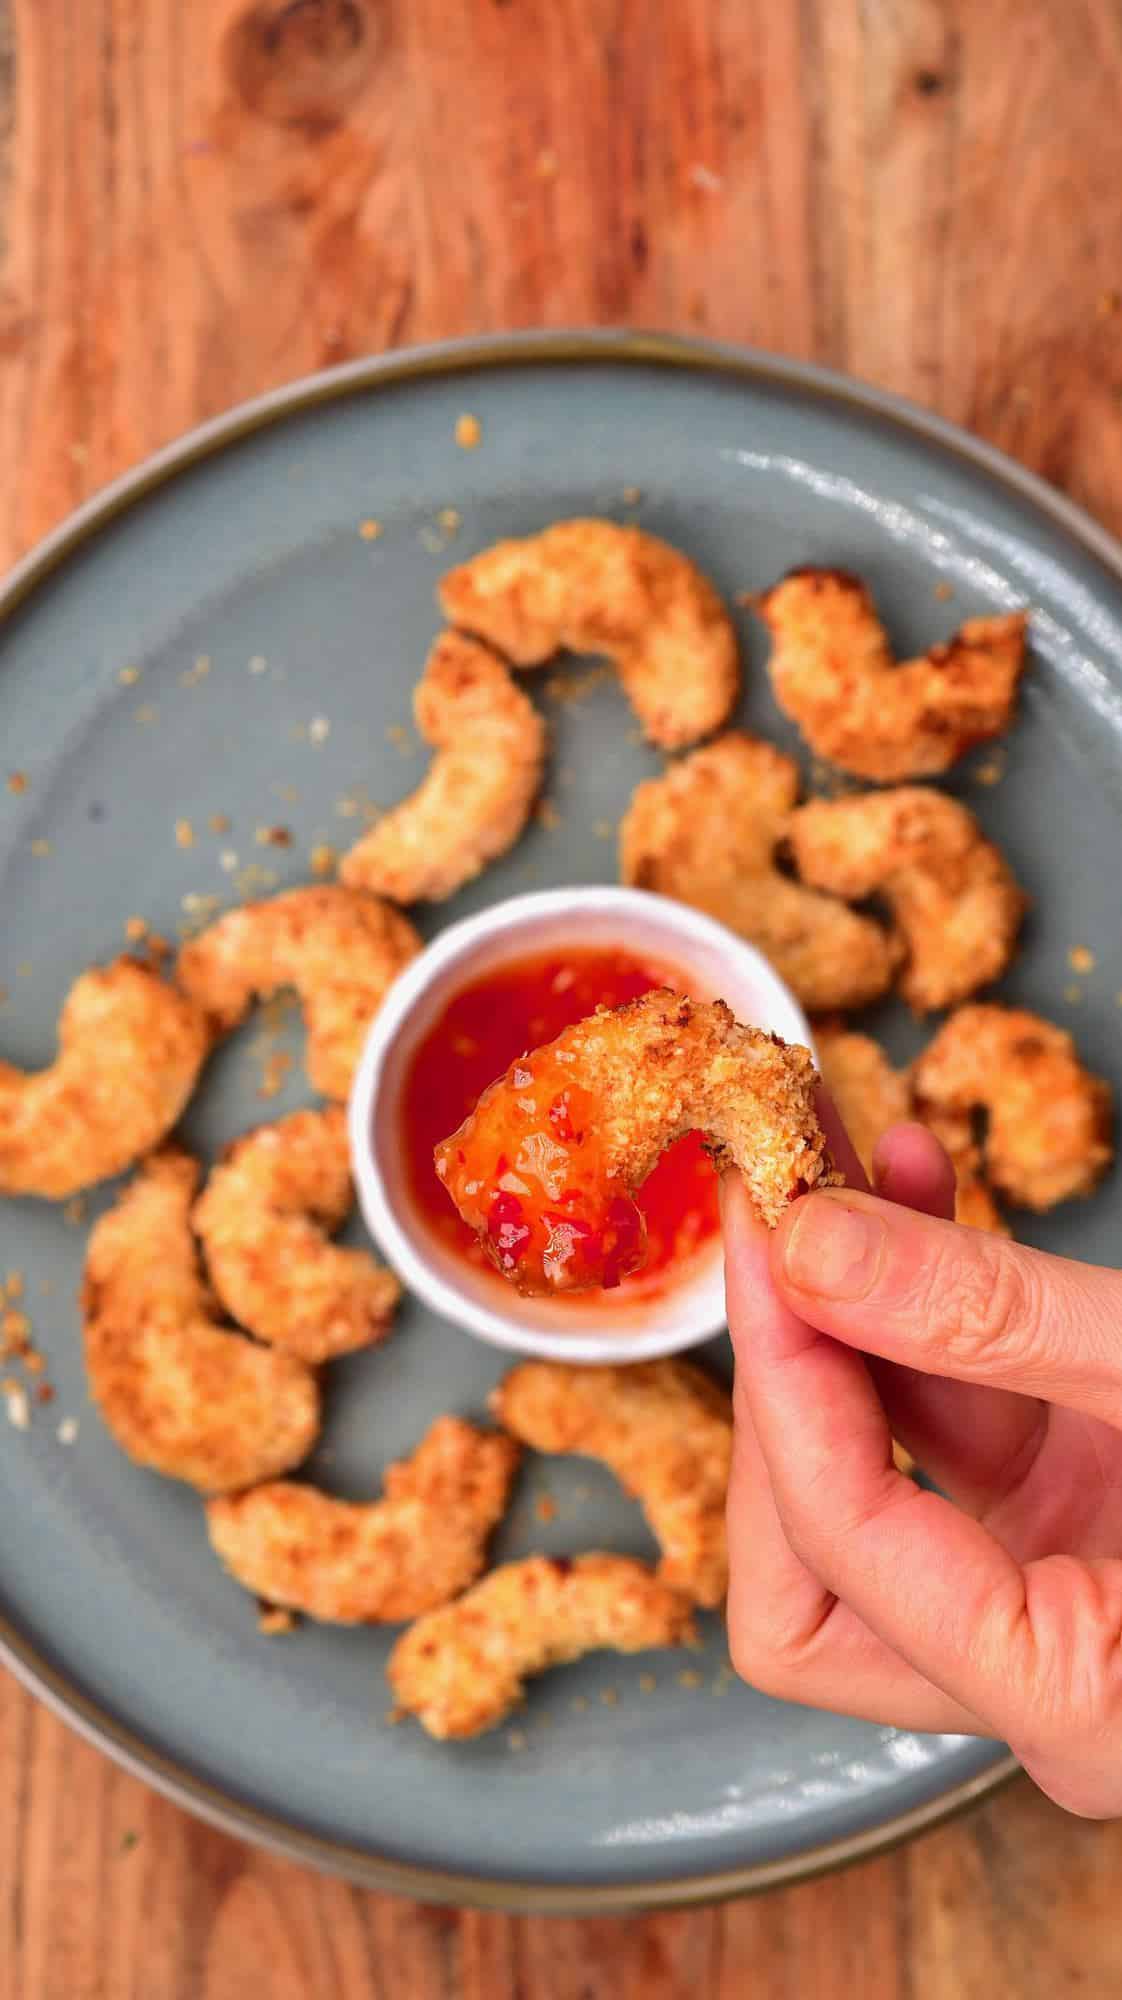 A hand holding a baked shrimp over a bowl with chili sauce in a plate with more baked shrimp